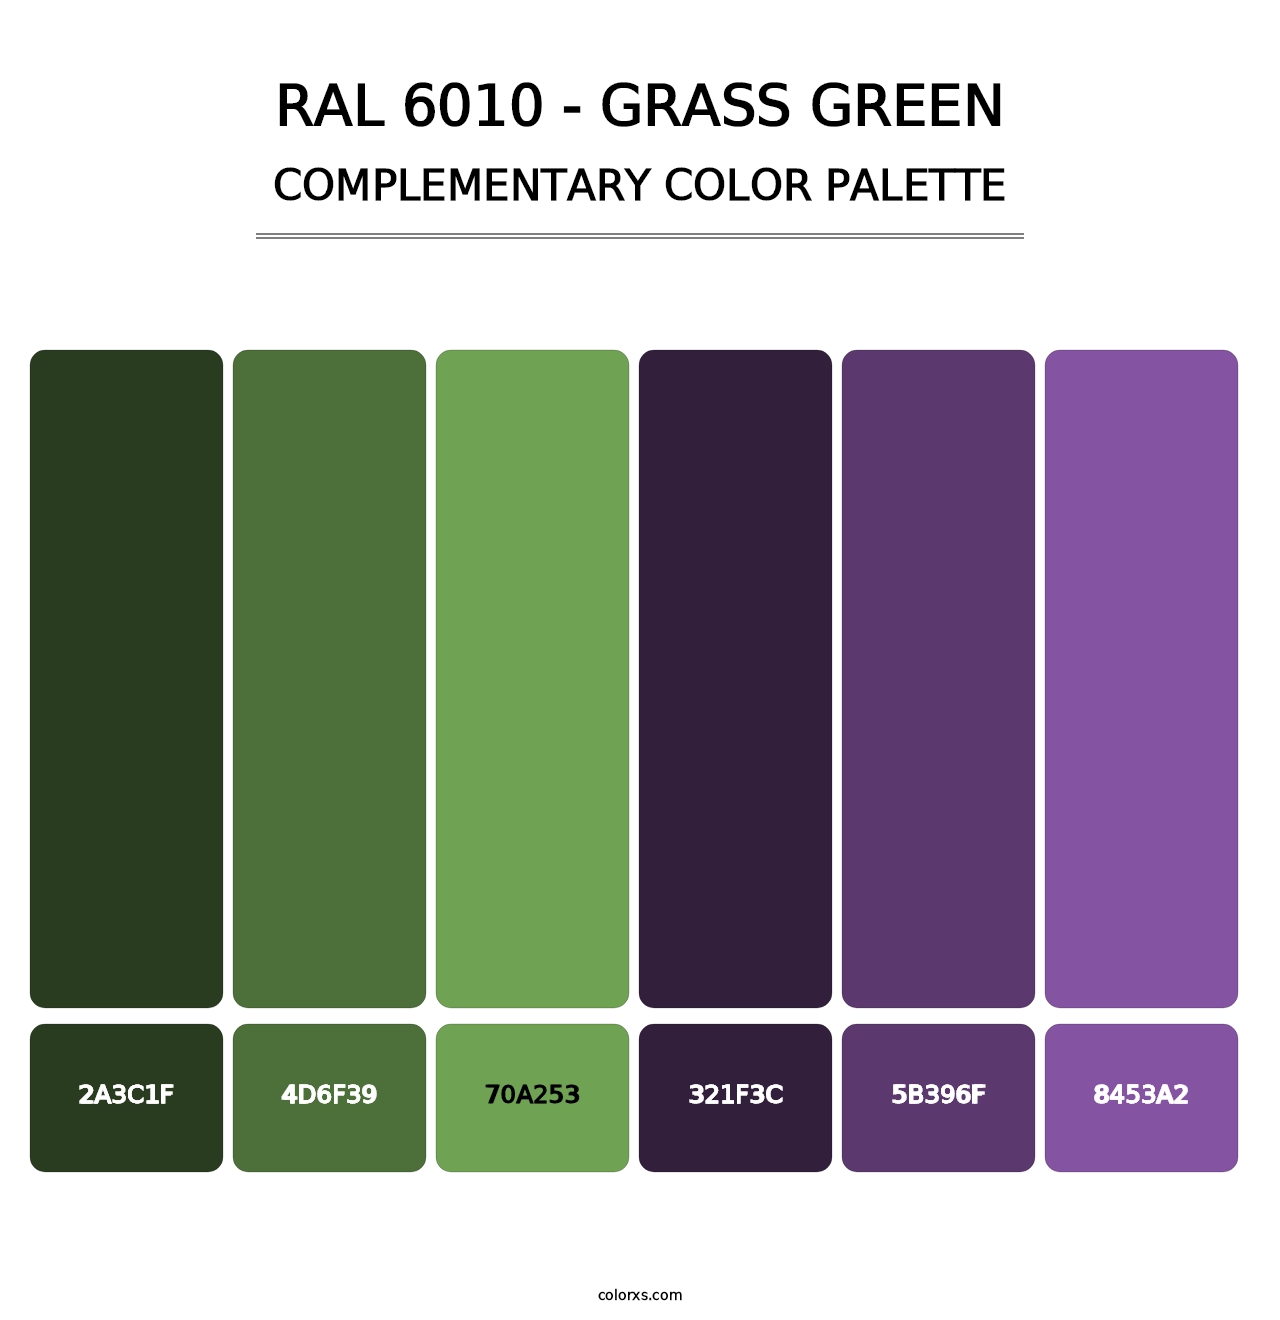 RAL 6010 - Grass Green - Complementary Color Palette